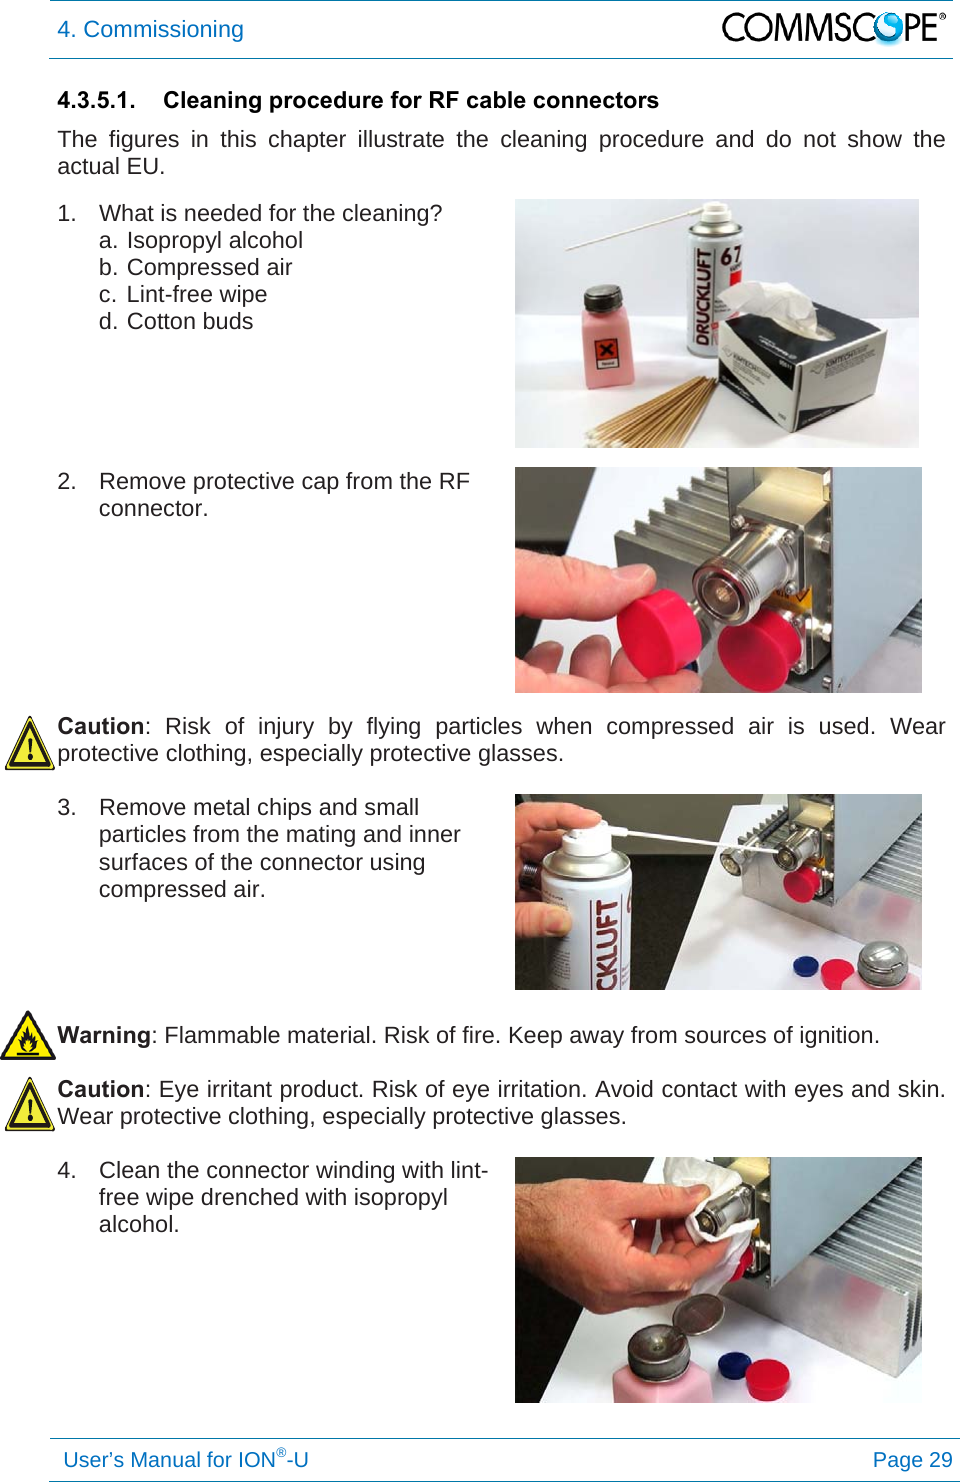 4. Commissioning   User’s Manual for ION®-U Page 29 4.3.5.1.  Cleaning procedure for RF cable connectors The figures in this chapter illustrate the cleaning procedure and do not show the actual EU.  1.  What is needed for the cleaning? a. Isopropyl alcohol b. Compressed air c. Lint-free wipe d. Cotton buds    2.  Remove protective cap from the RF connector.   Caution: Risk of injury by flying particles when compressed air is used. Wear protective clothing, especially protective glasses.  3.  Remove metal chips and small particles from the mating and inner surfaces of the connector using compressed air.    Warning: Flammable material. Risk of fire. Keep away from sources of ignition.  Caution: Eye irritant product. Risk of eye irritation. Avoid contact with eyes and skin. Wear protective clothing, especially protective glasses.  4.  Clean the connector winding with lint-free wipe drenched with isopropyl alcohol.   